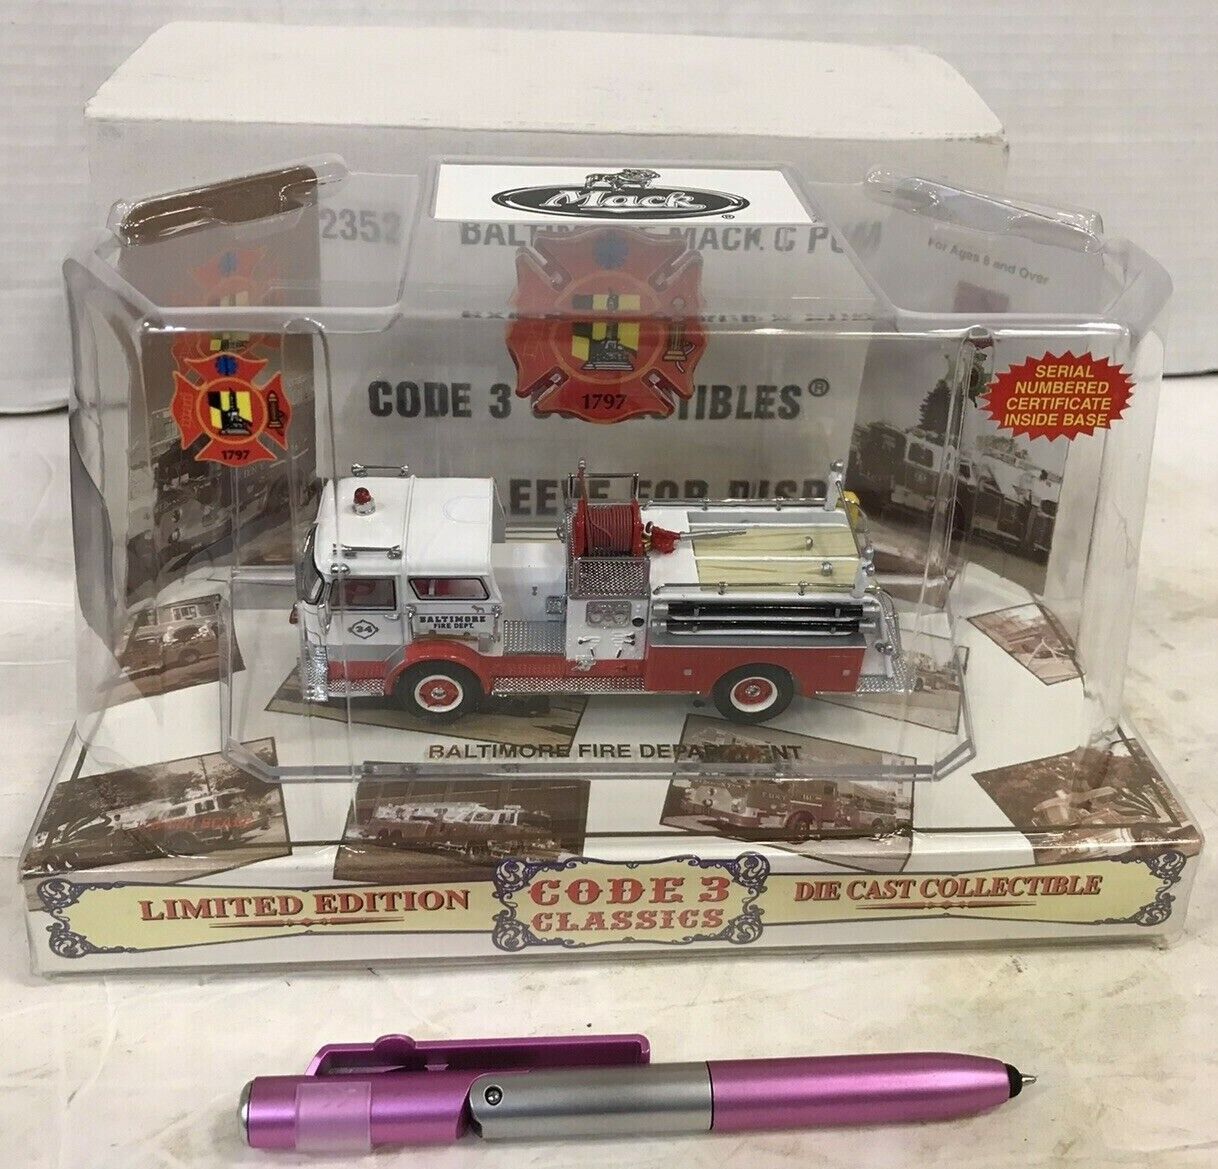 CODE 3 COLLECTIBLES BALTIMORE MACK C PUMPER #12352 NEW IN BOX 1:64 SCALE 